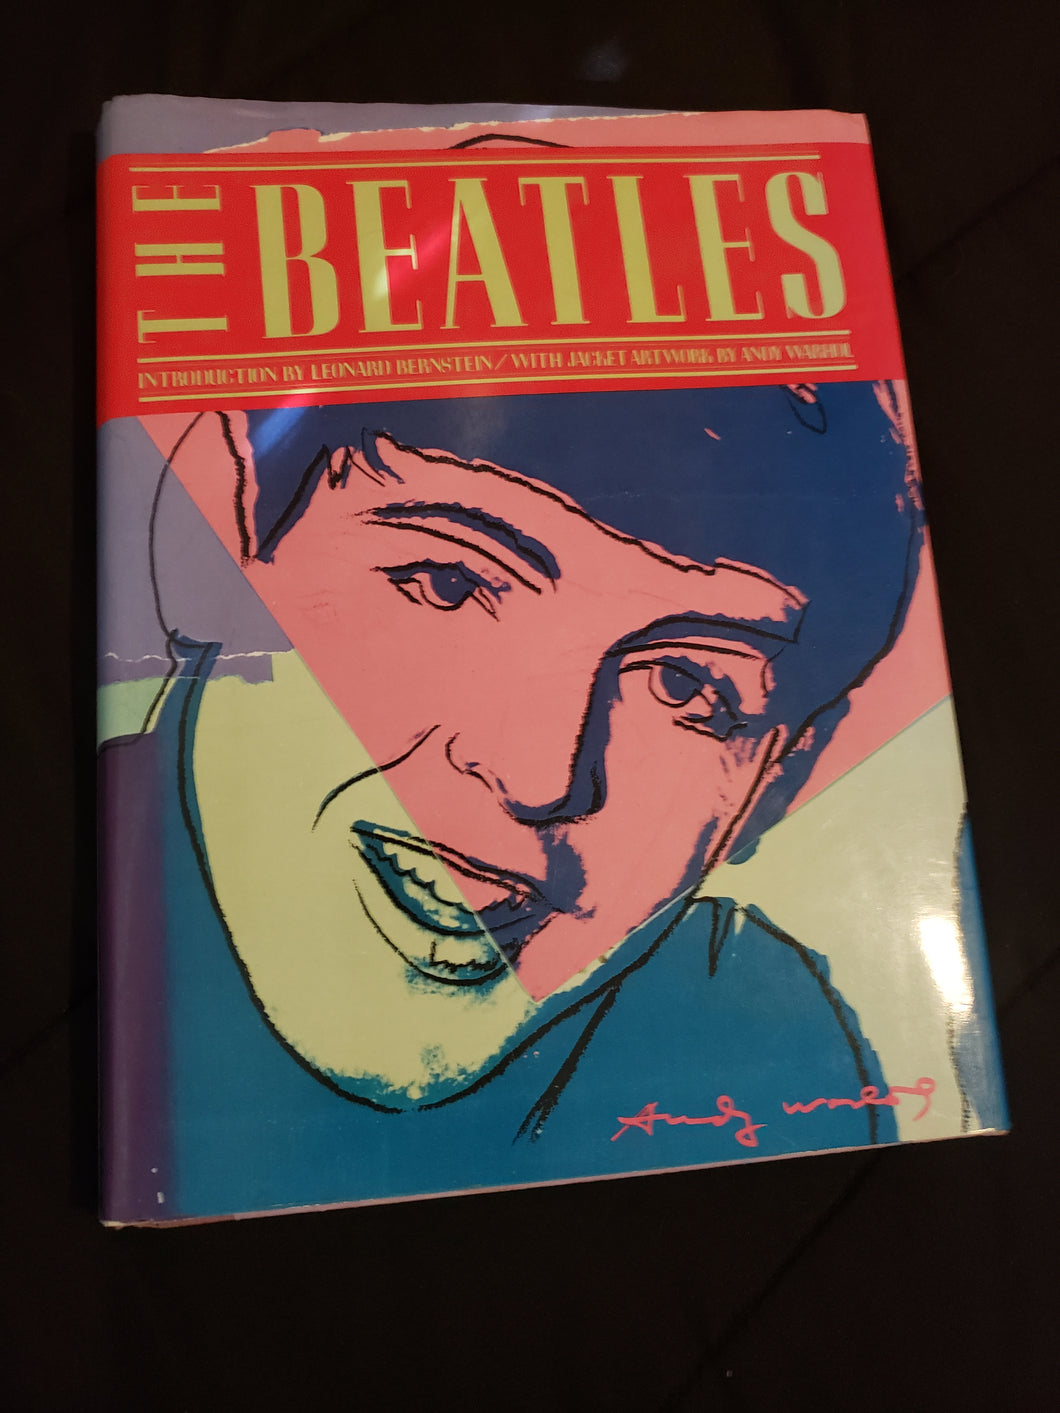 THE BEATLES BOOK with LIMITED EDITION ANDY WARHOL POSTER